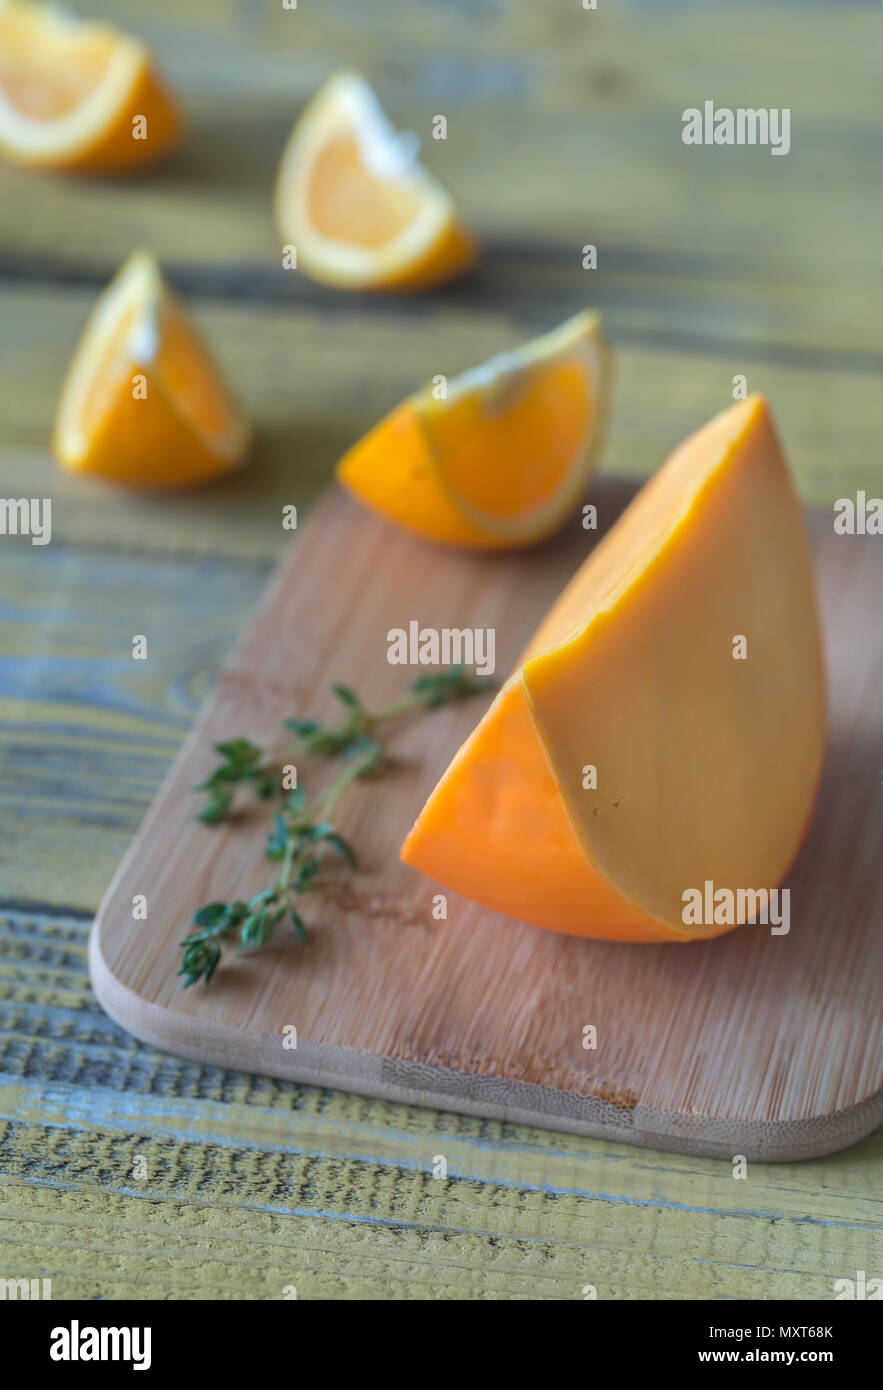 Mimolette cheese on the wooden board Stock Photo